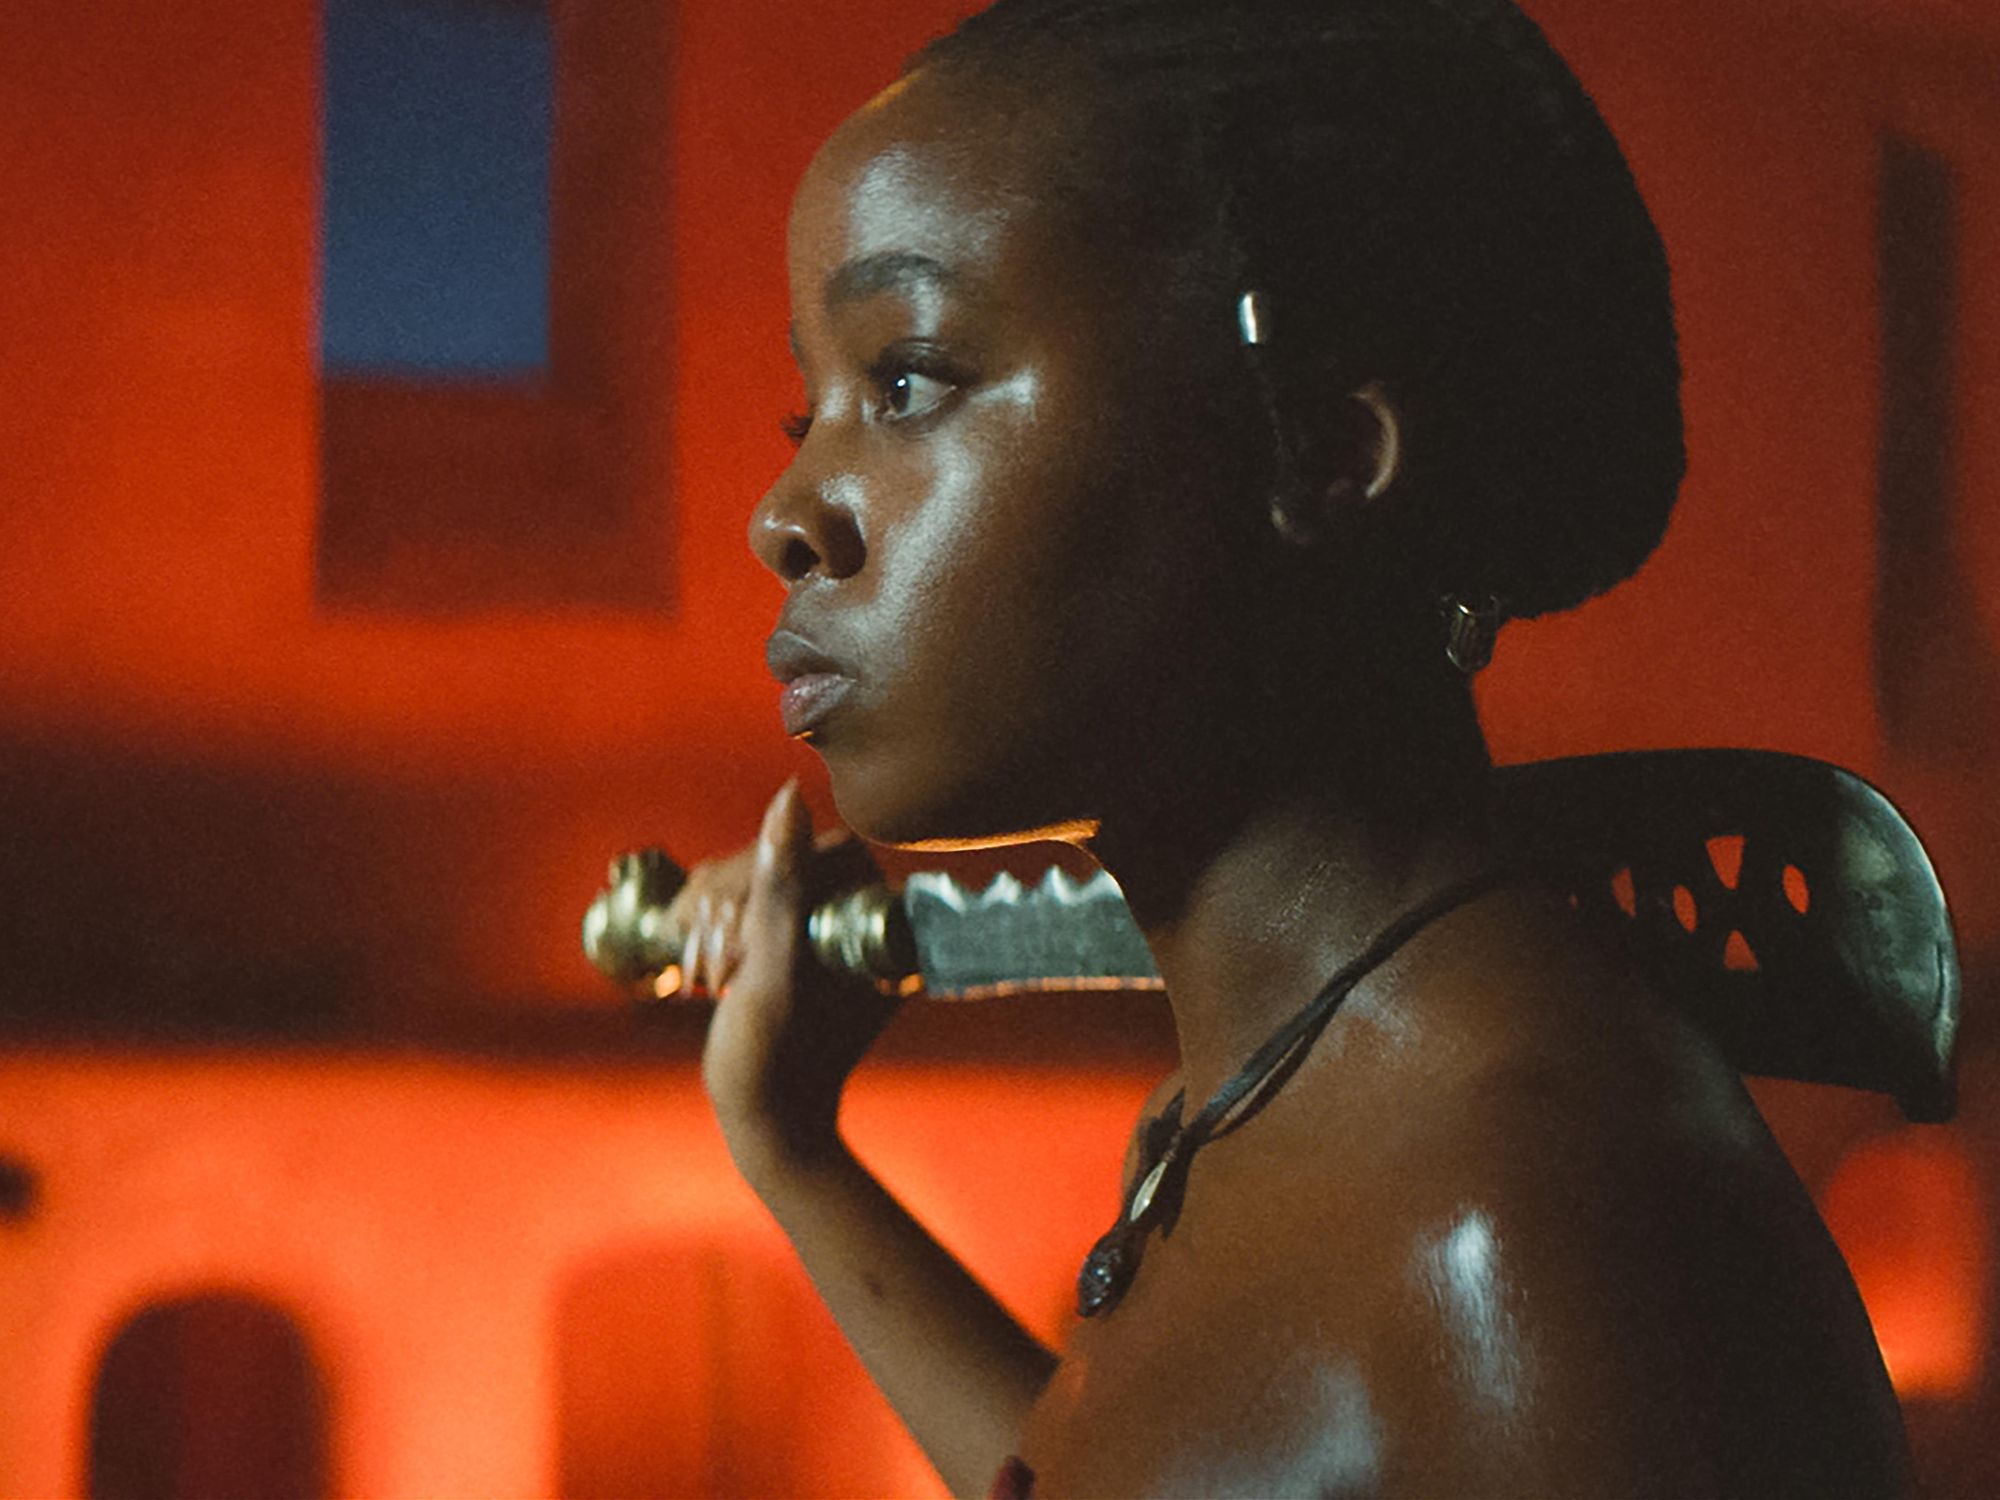 An image from the film The Woman King of Thuso Mbedu holding a machete on her shoulder